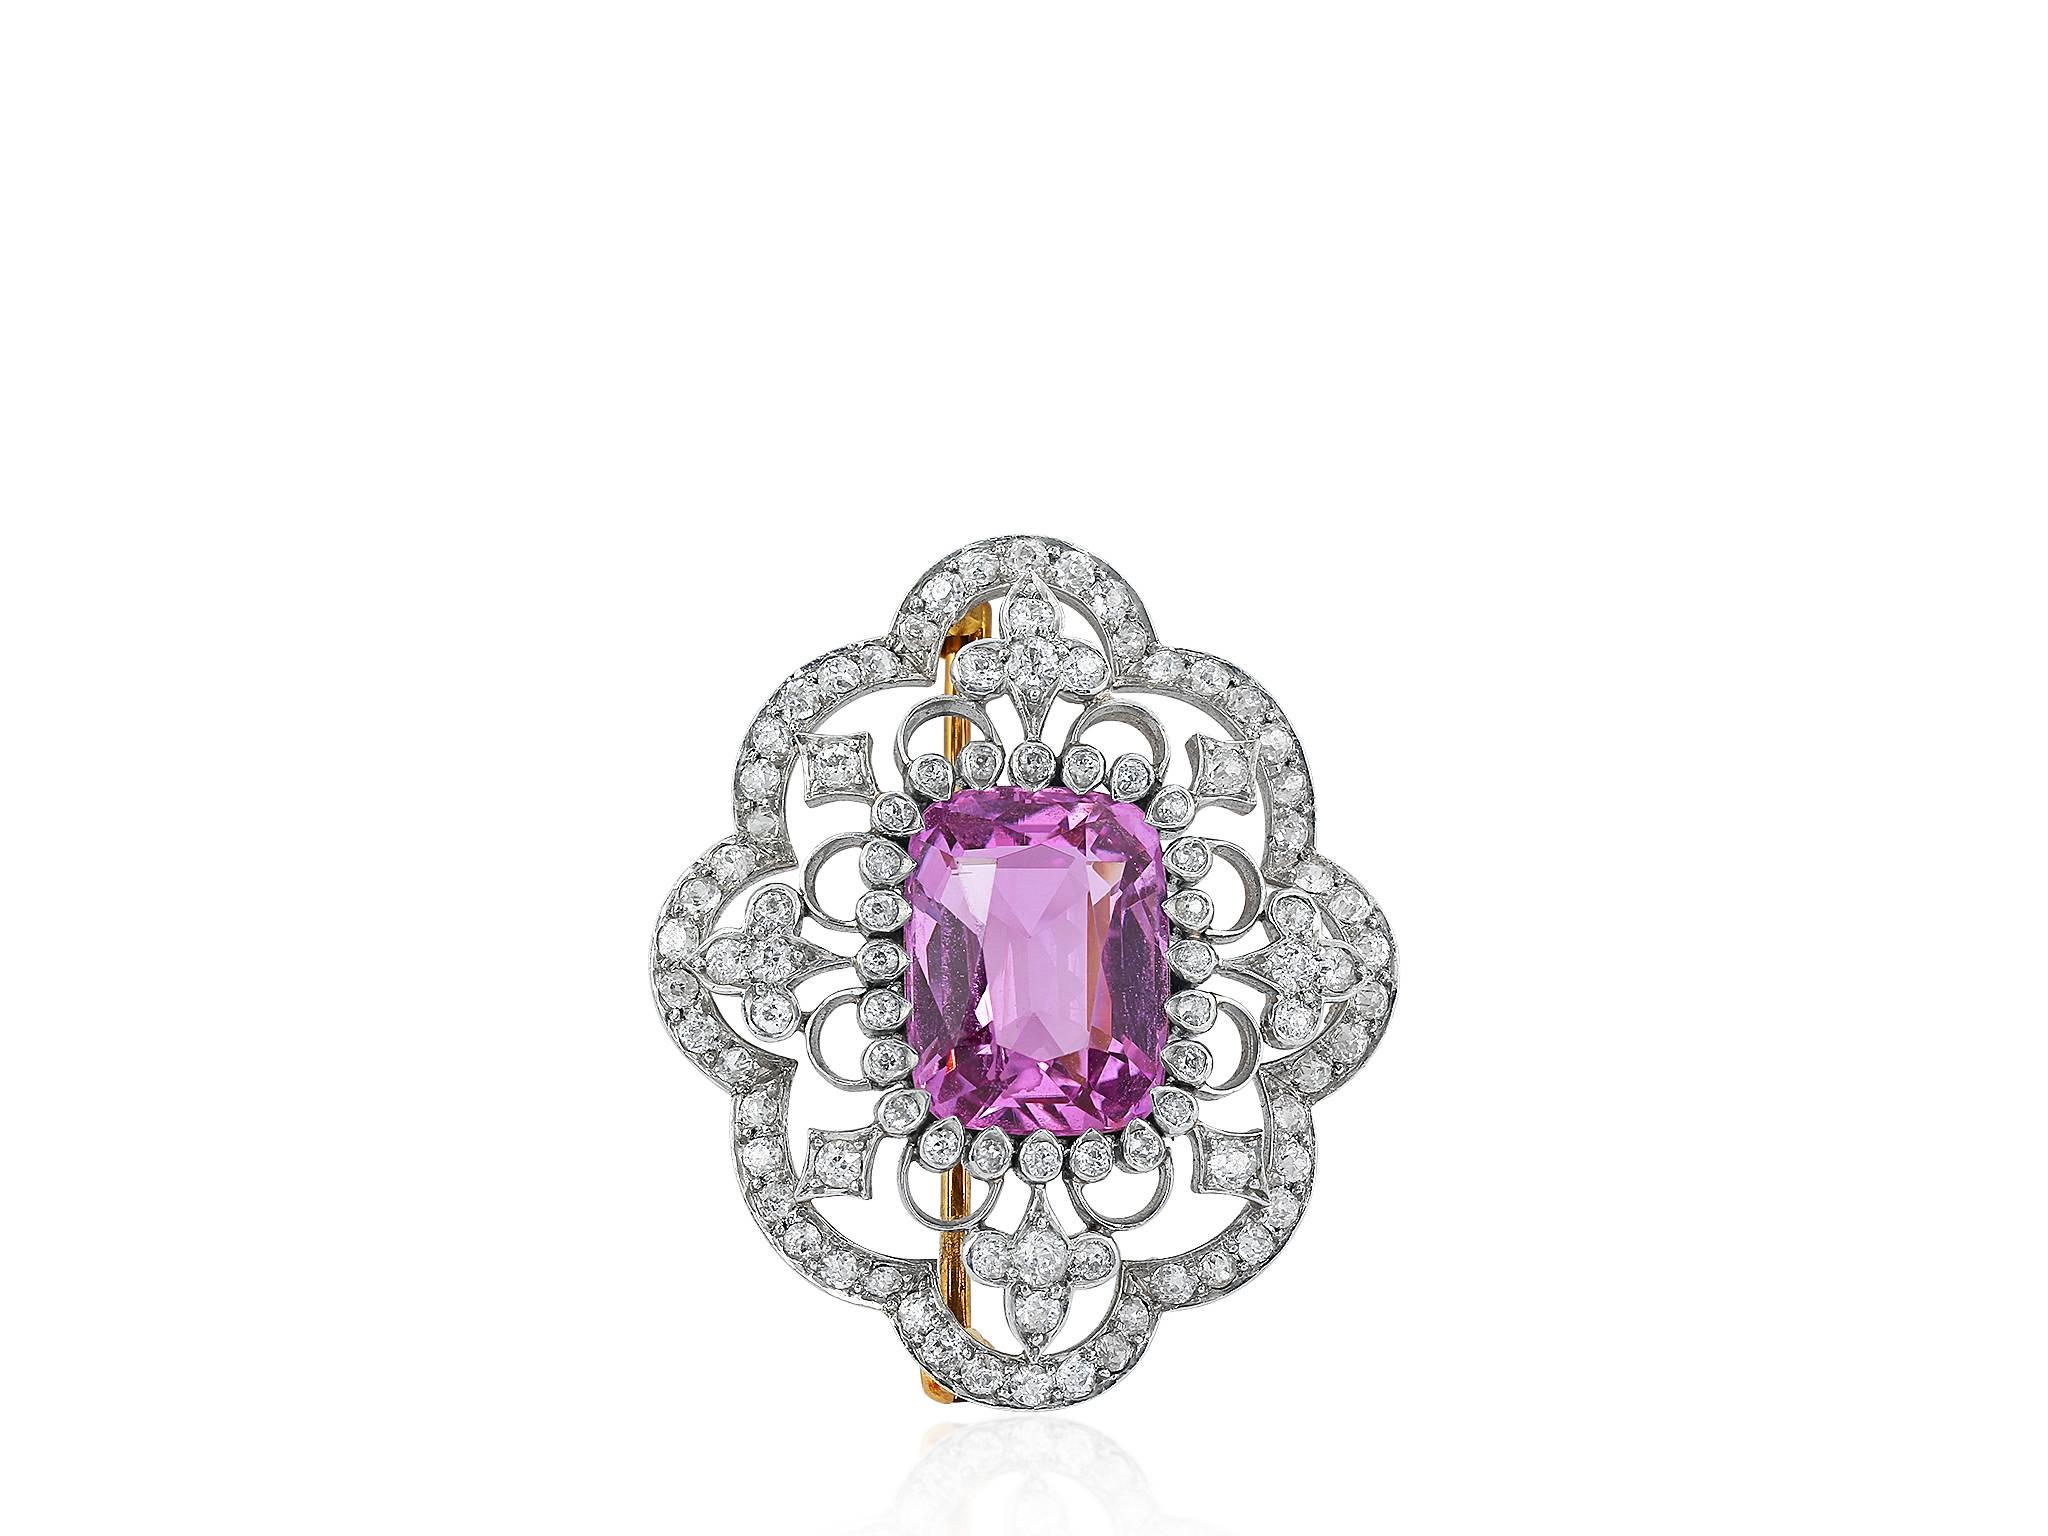 Platinum & 18 karat yellow gold Edwardian pin consisting of 1 cushion cut pink topaz having a total weight of approximately 7.50 carats set with 94 old European cut diamonds having a total weight of approximately 1.50 carats. 